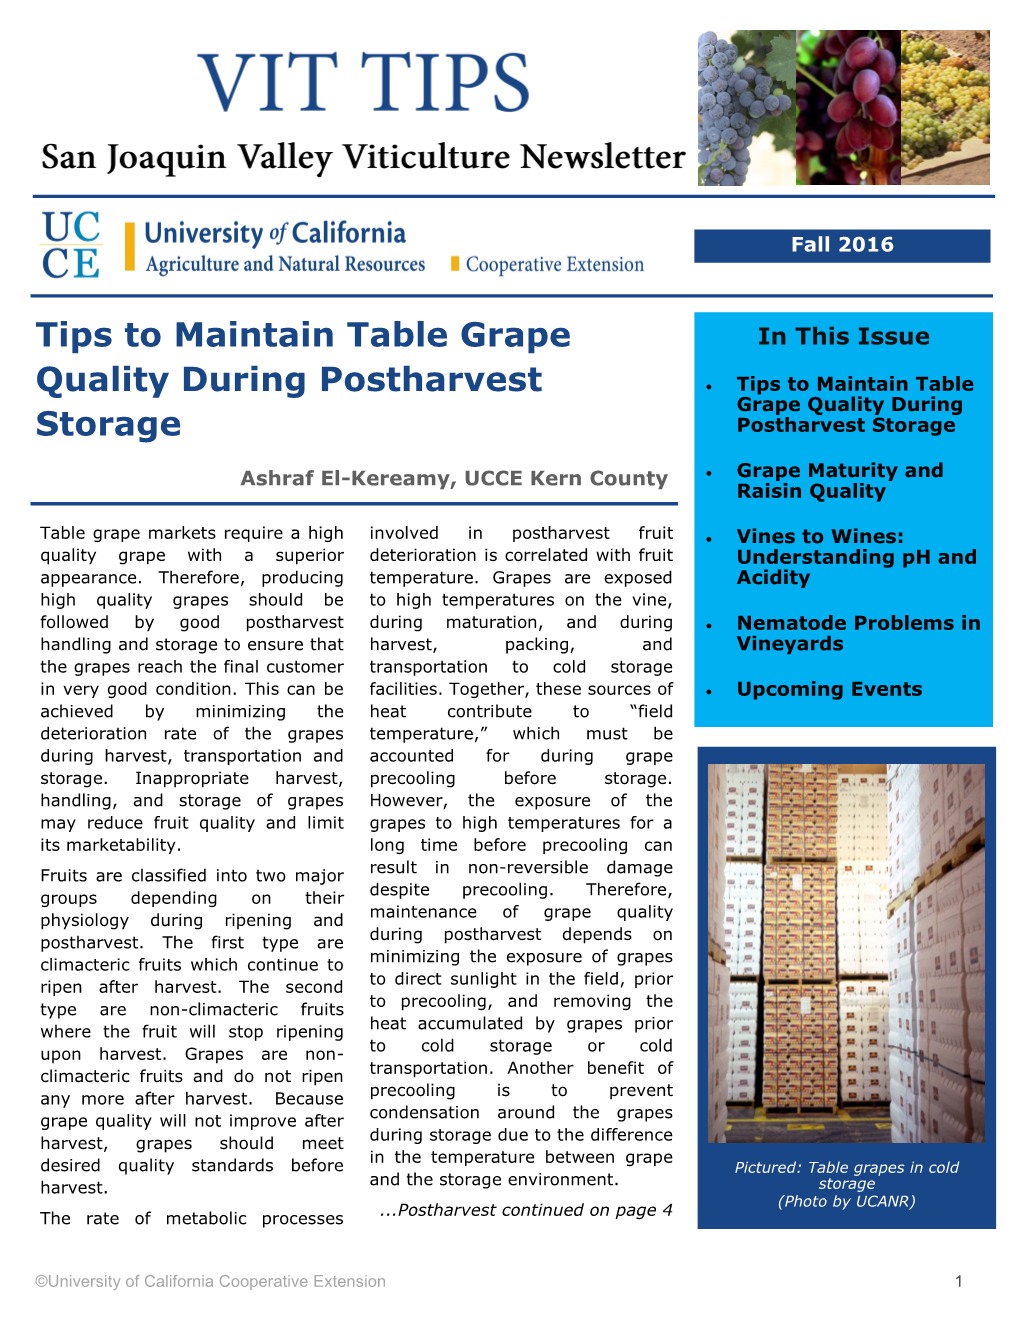 Tips to Maintain Table Grape Quality During Postharvest Storage